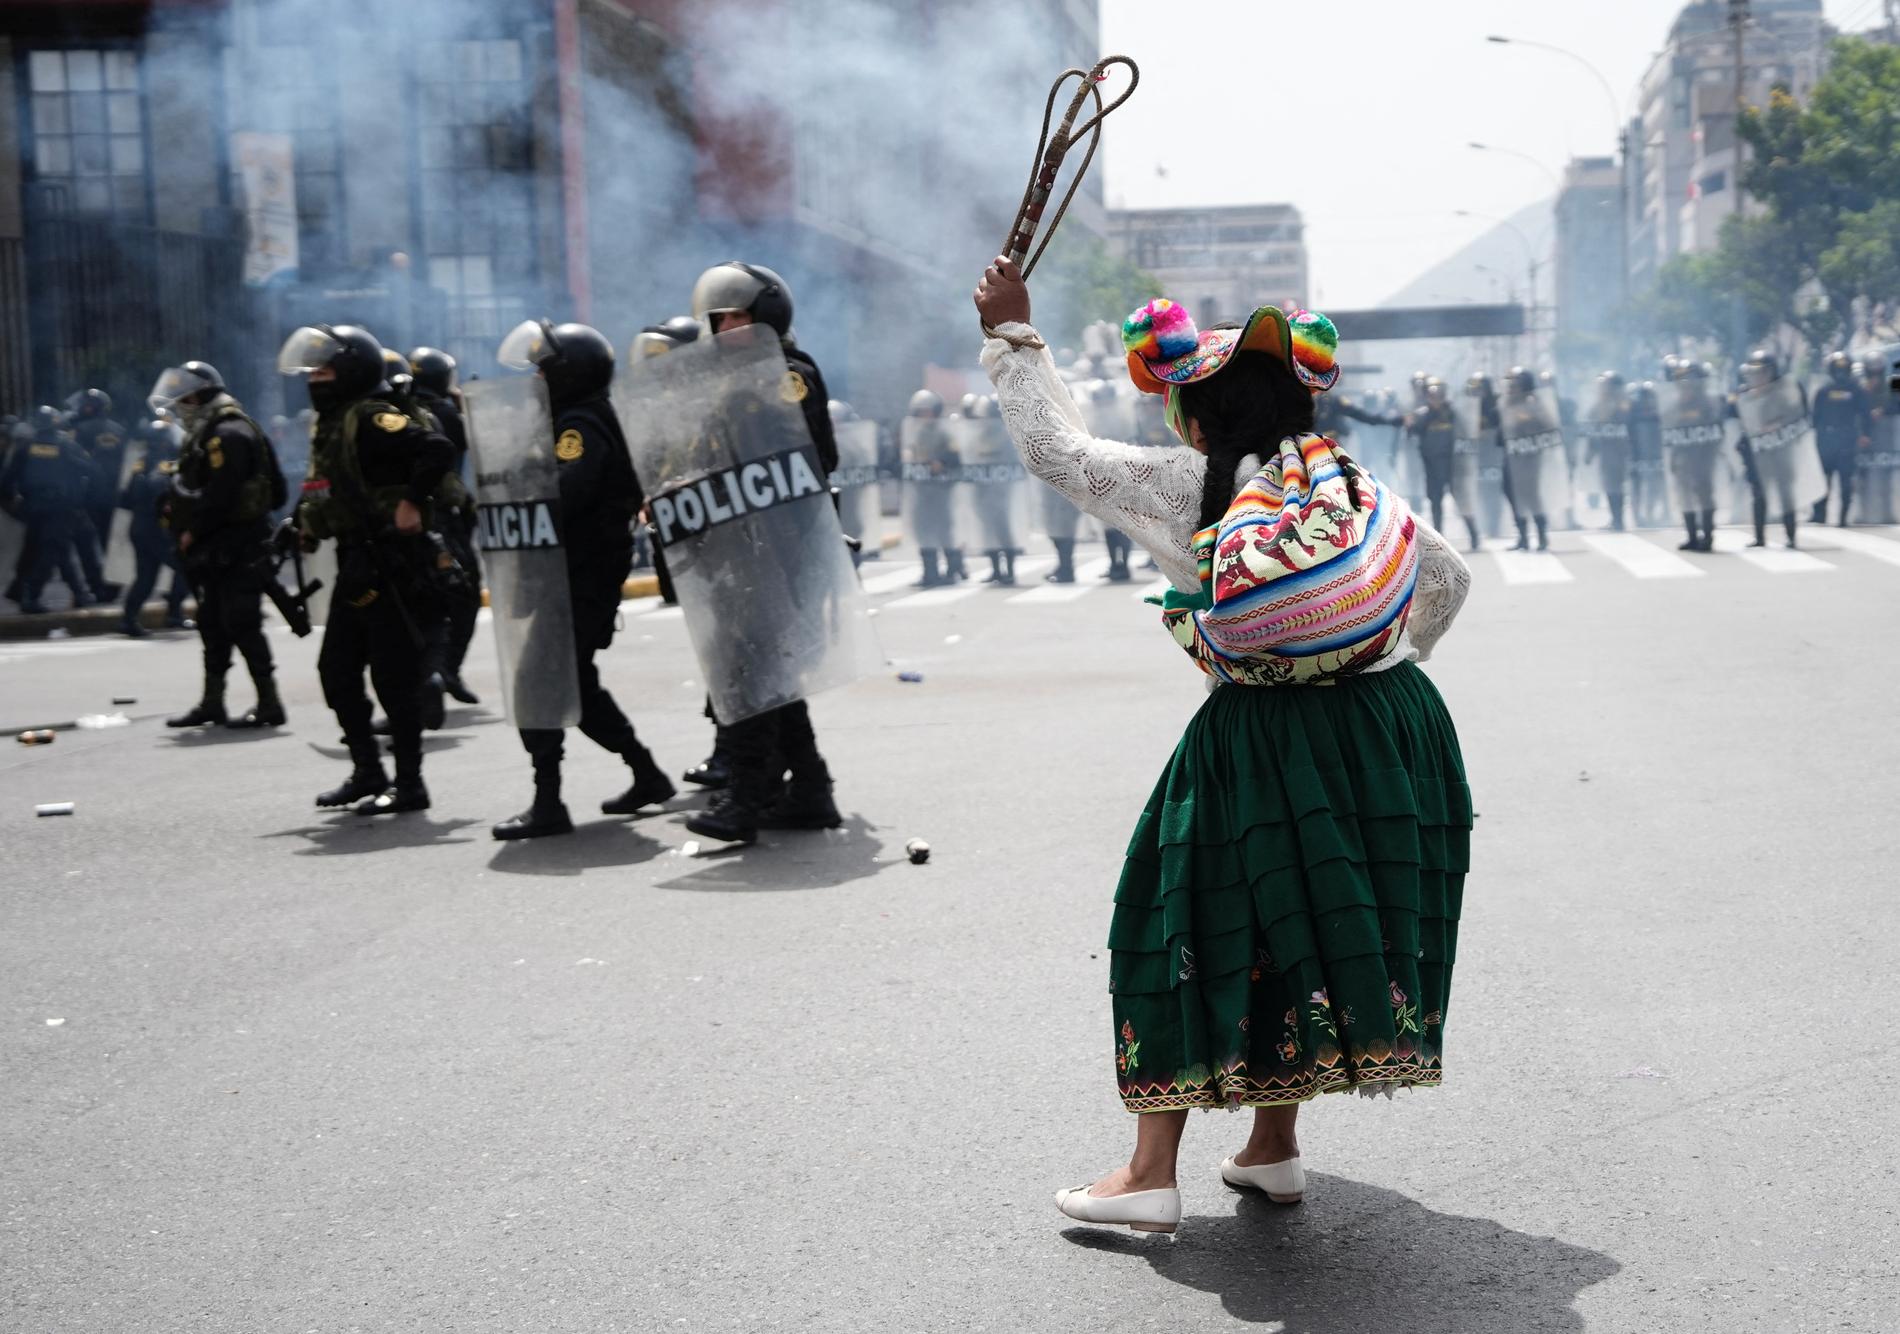 Violent Protests Erupt in Peru on National Day: Demands for New Elections and President’s Resignation